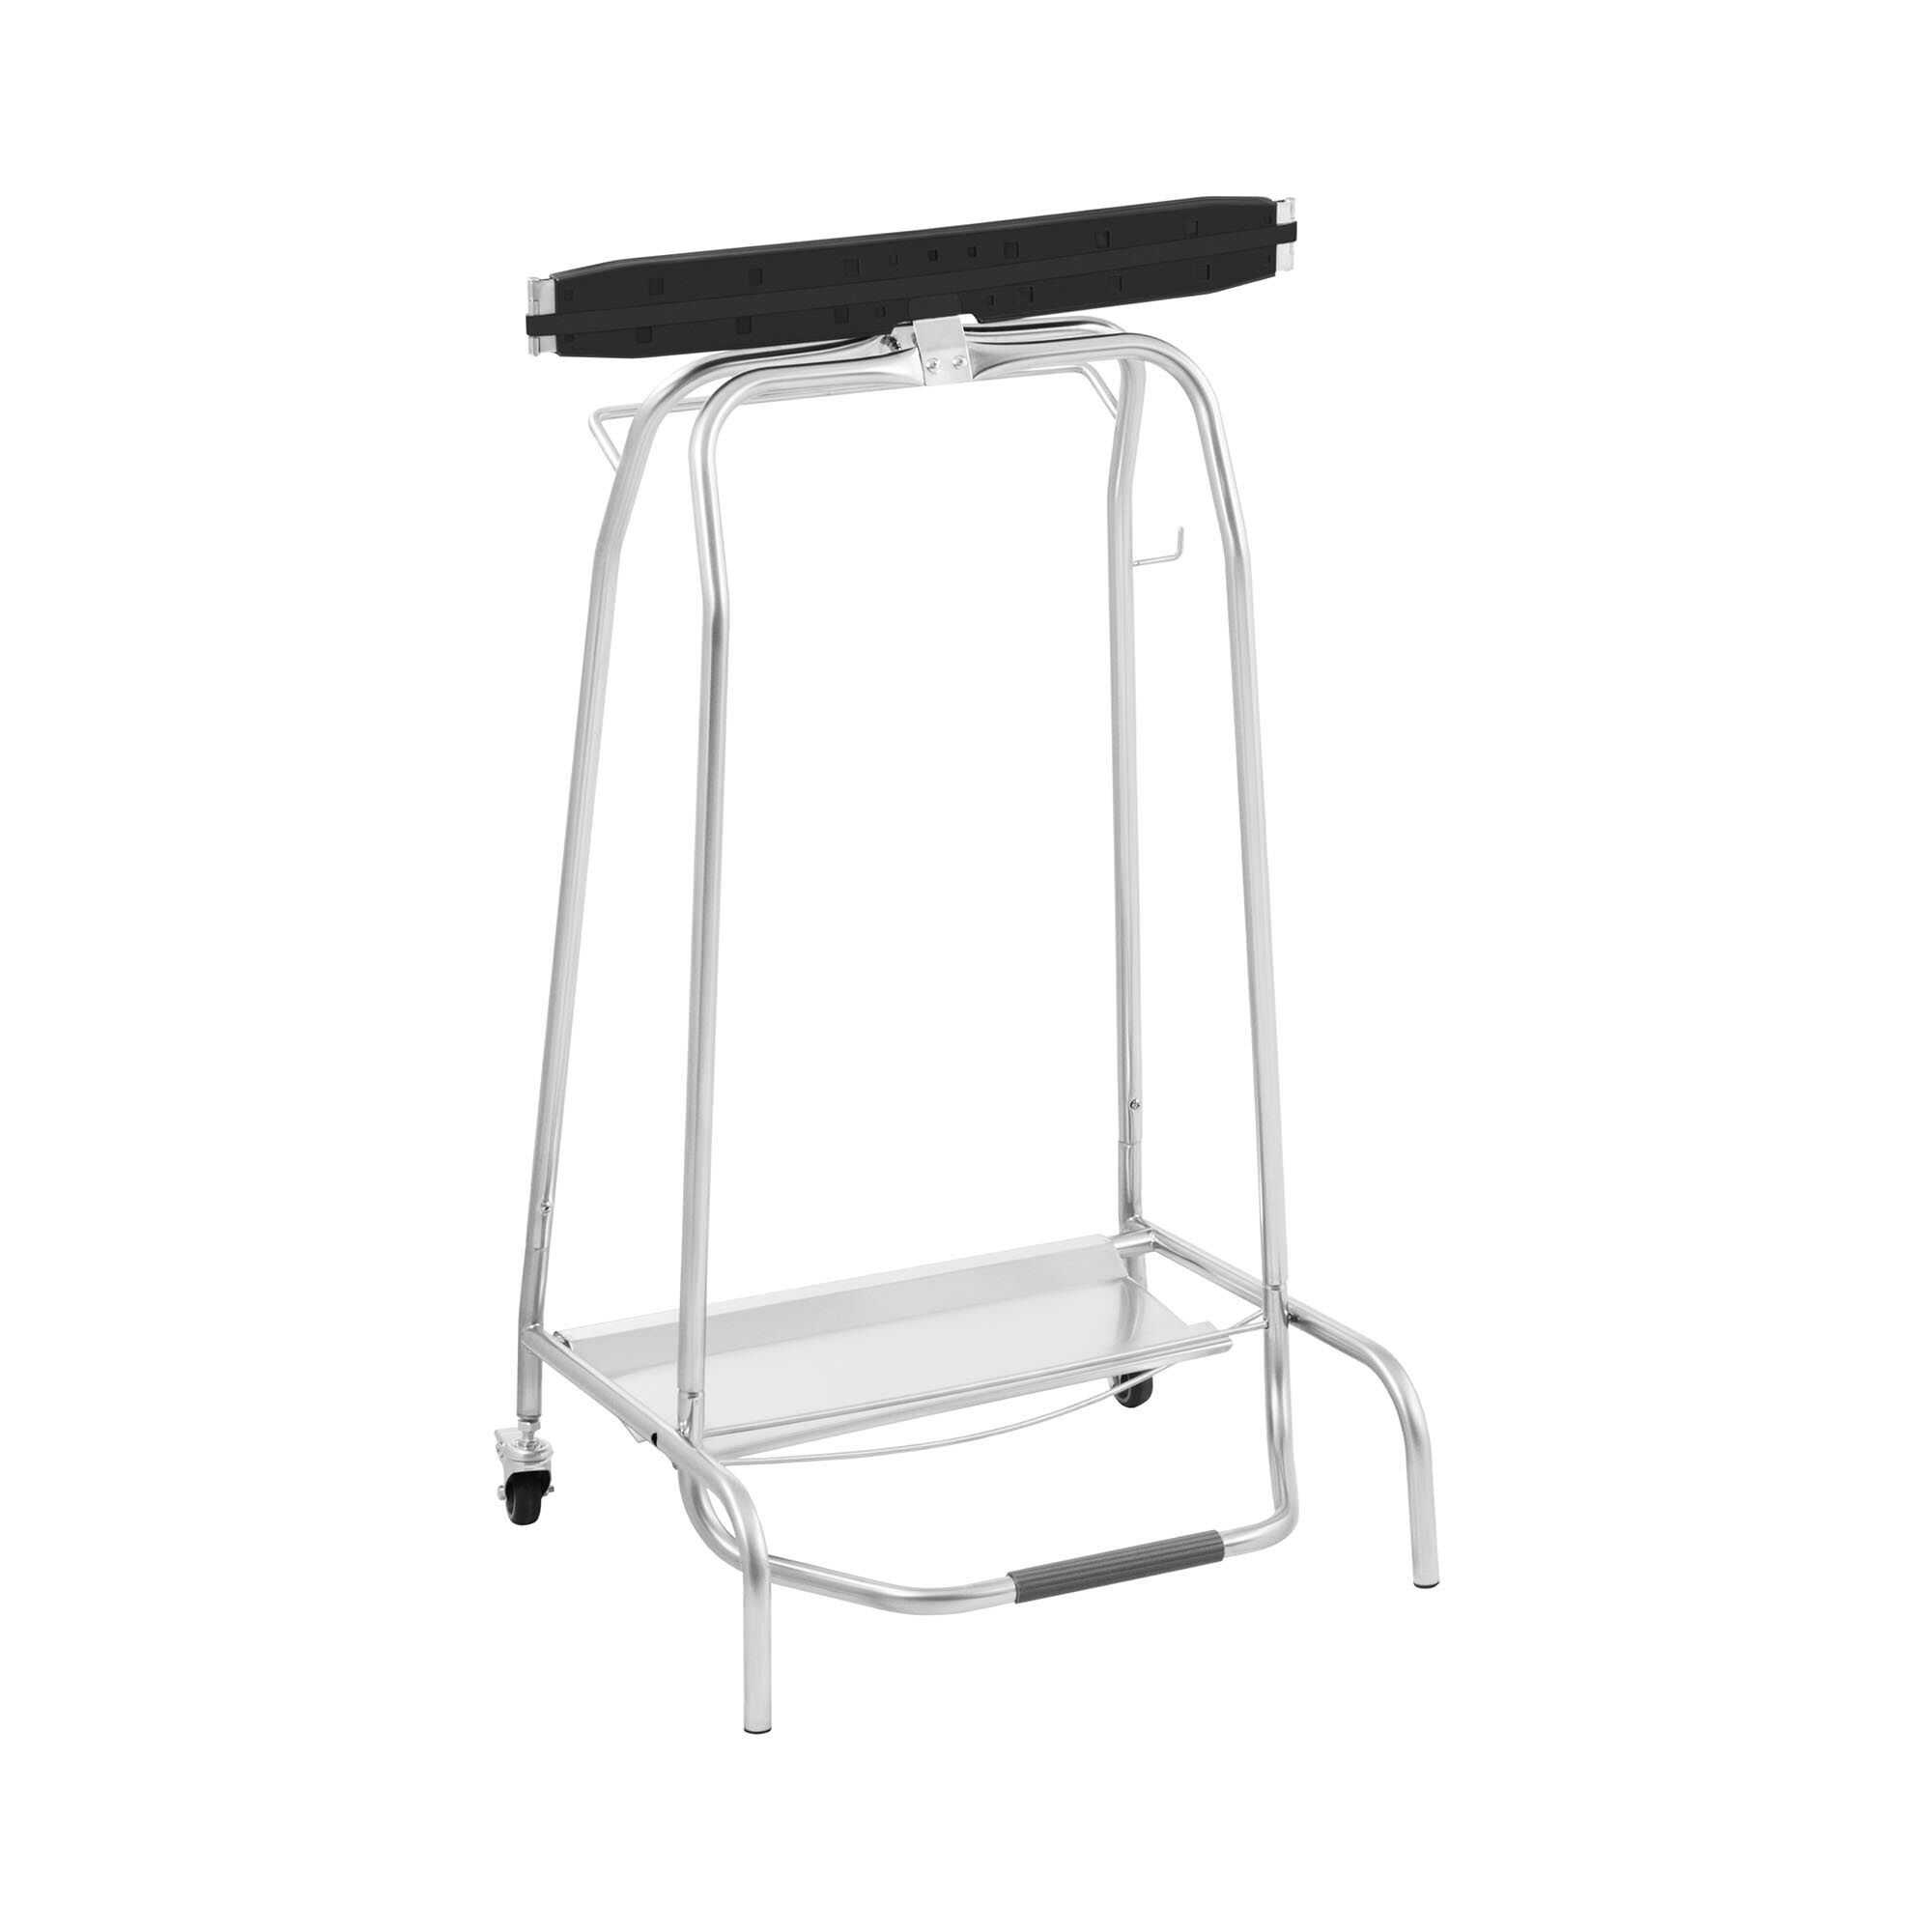 Royal Catering Trash Bag Holder - Silver - foot pedal - 2 castors with brakes - Royal Catering